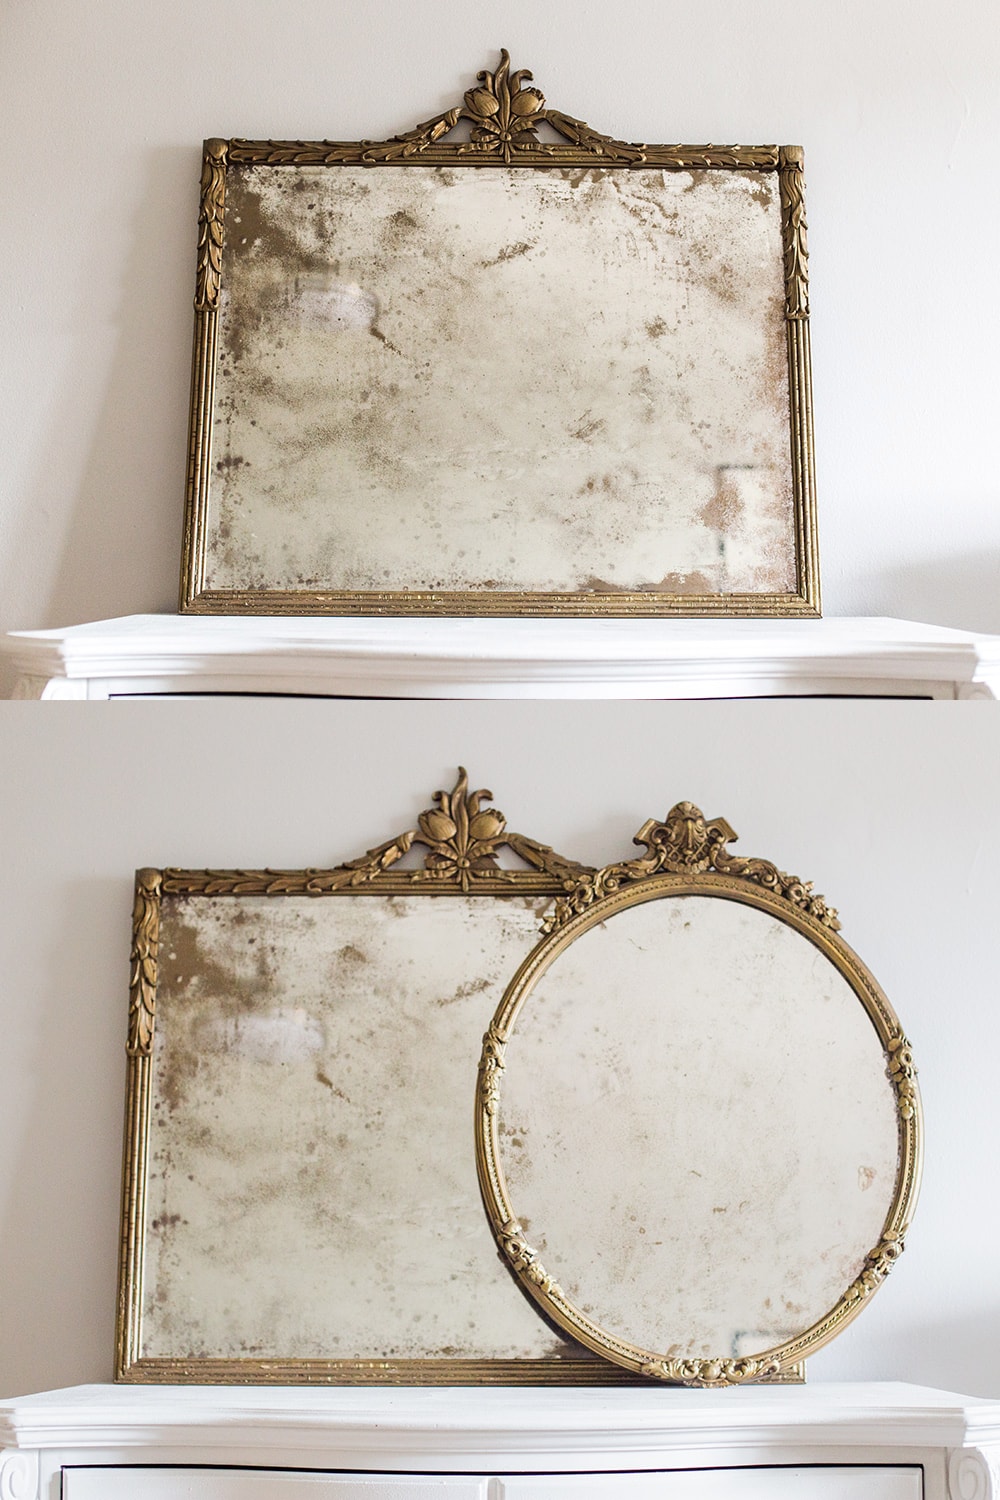 How-to Create an Antiqued Silver Paint Finish. Diy. Tutorial